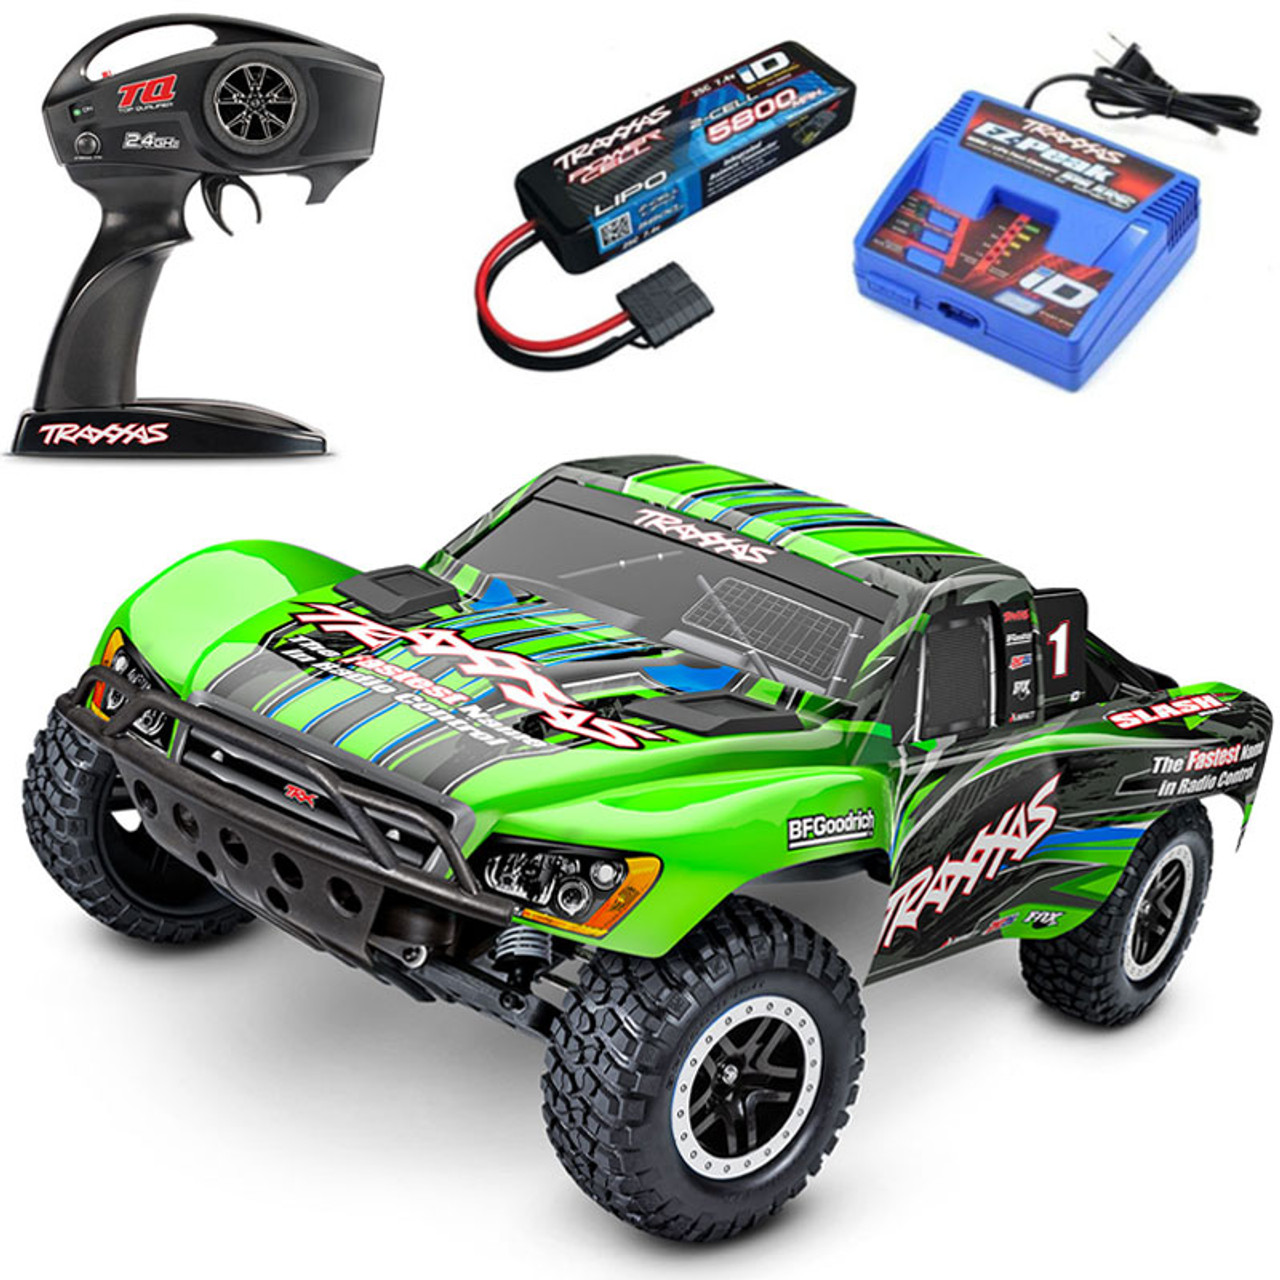 Traxxas Slash 1/10 2WD Brushless BL-2s Short Course RTR Truck w/2S 